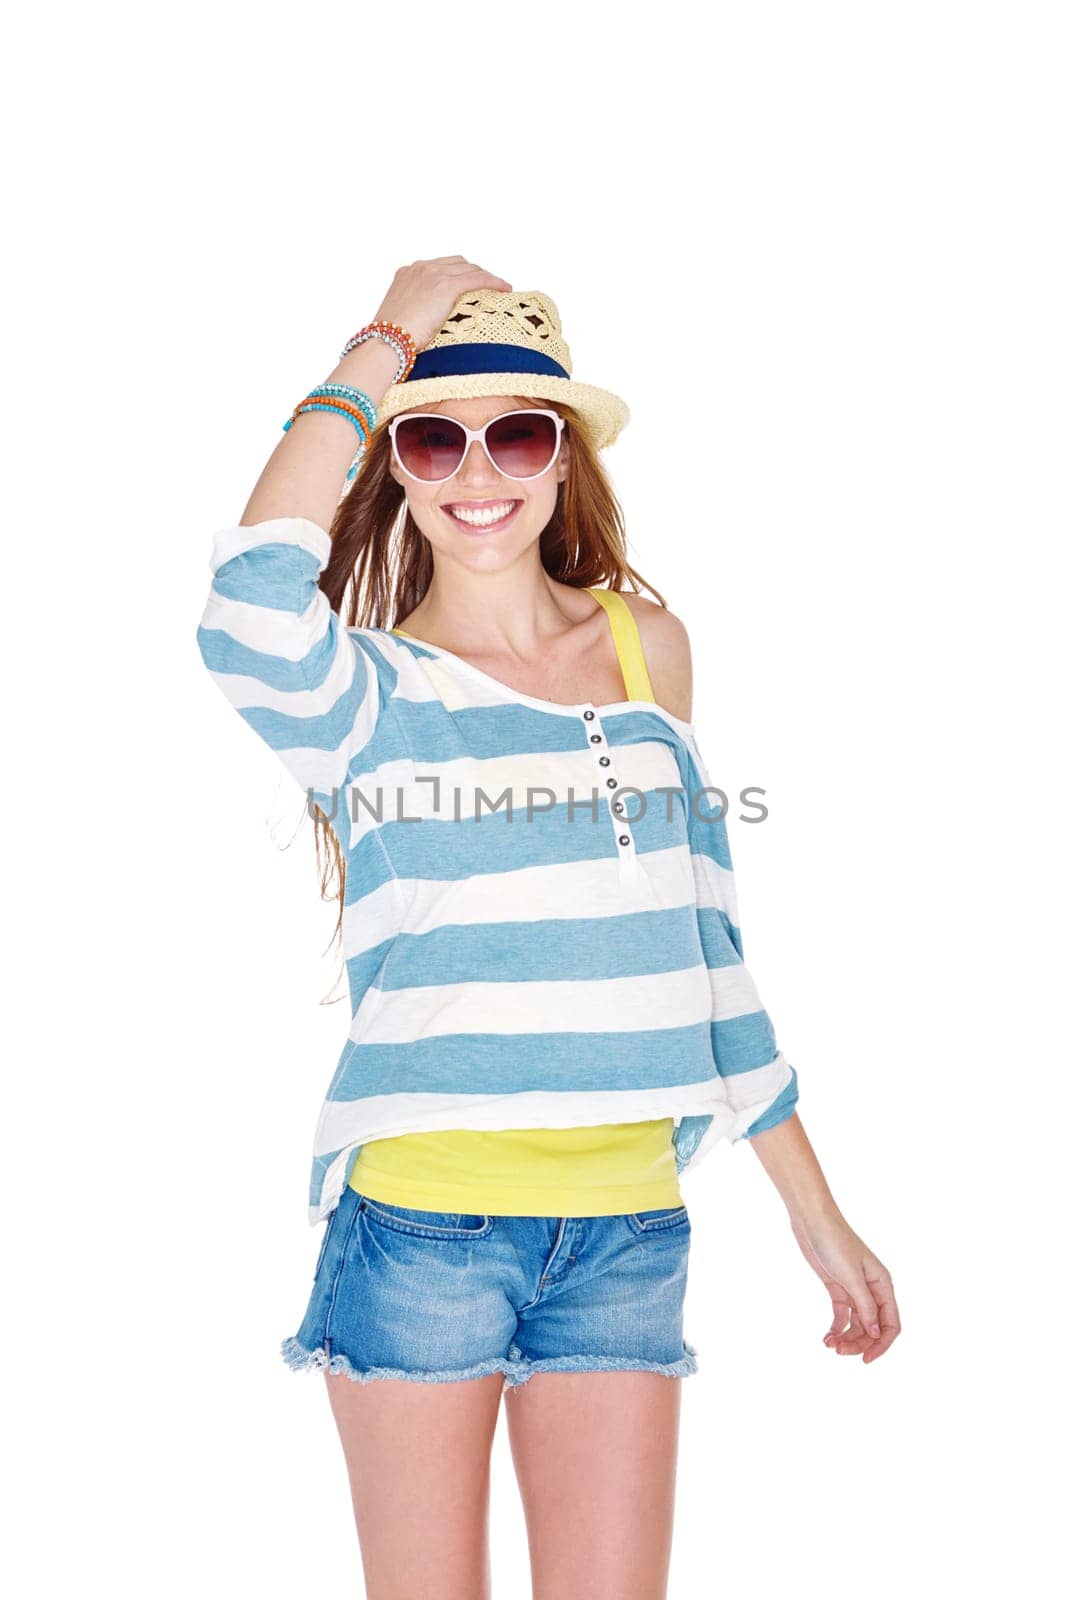 Dressed for summer fun. Studio shot of a young woman dressed for summer isolated on white